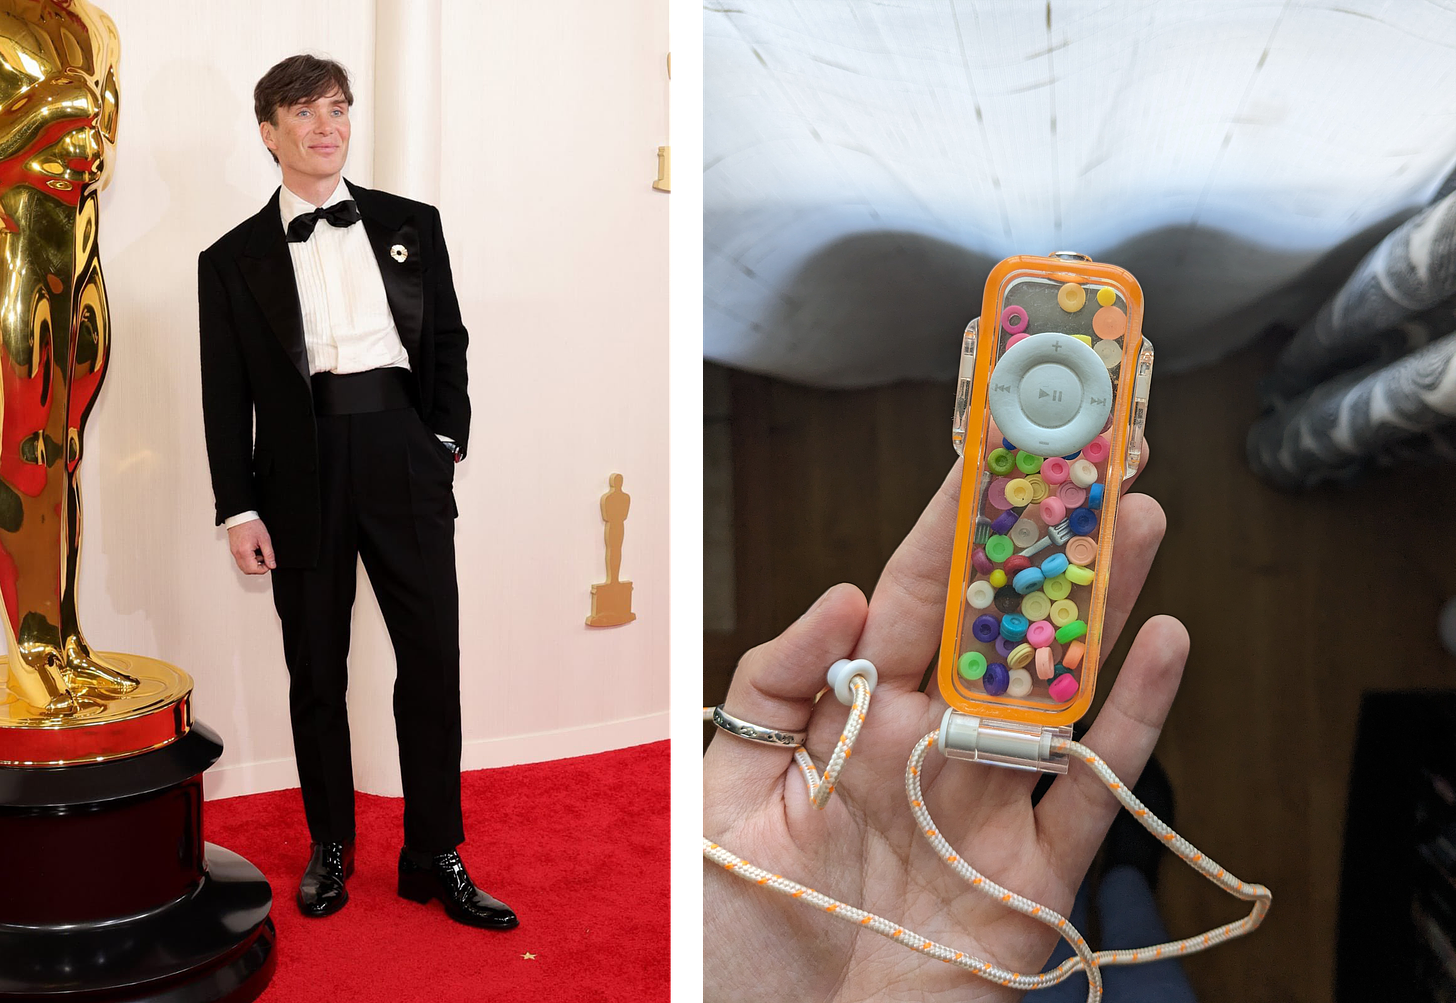 Left: Cillian Murphy in a high-waisted black suit with a floppy bow tie and circular brooch. Right: the aforementioned lanyard.